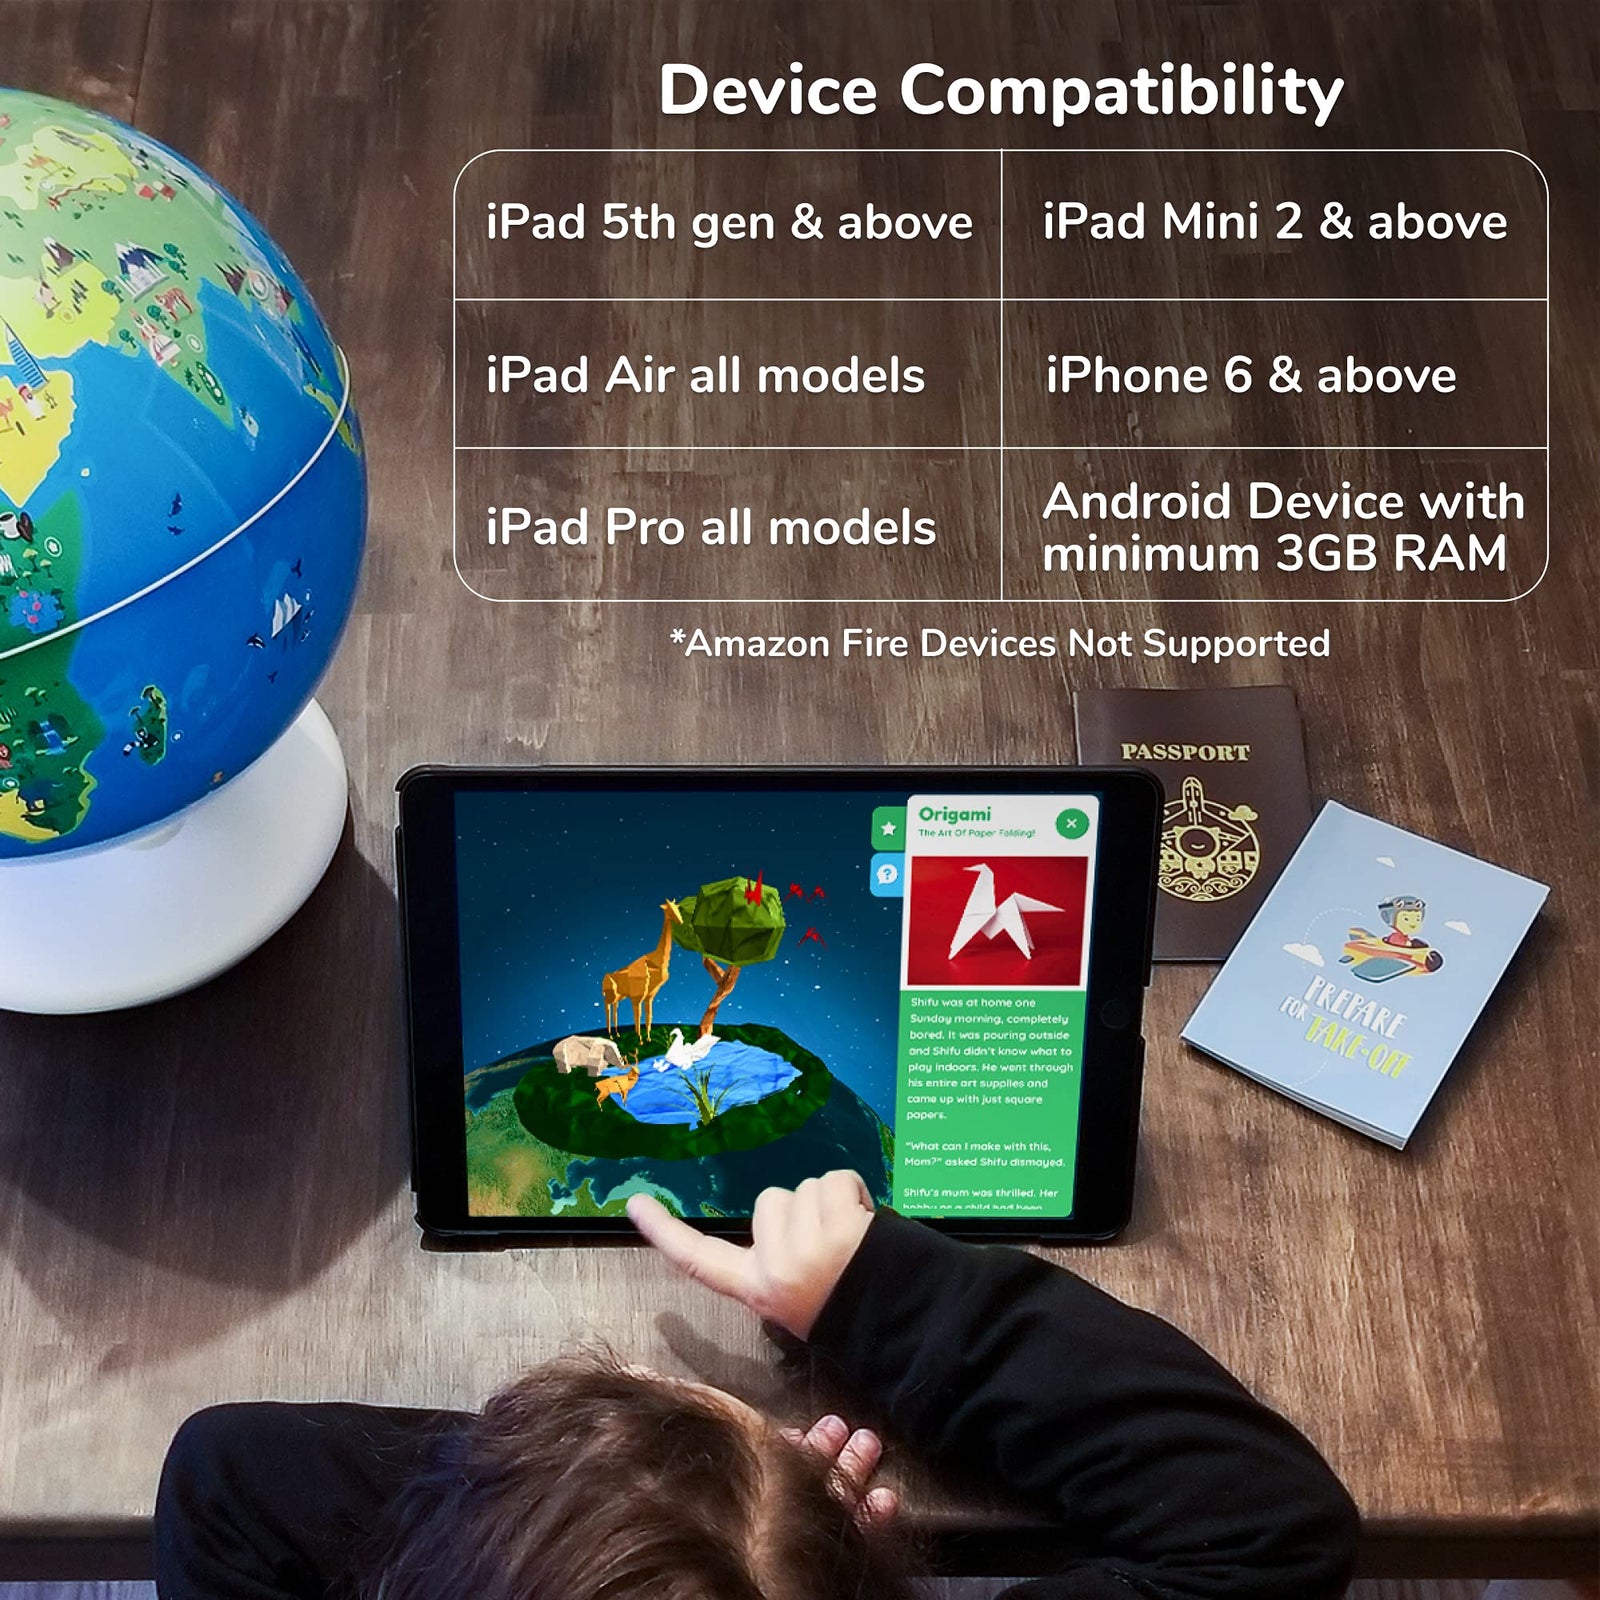 Orboot Earth by PlayShifu (App Based): Interactive AR Globe For Kids, STEM Toy Ages 4-10, Educational Gift For Boys & Girls (No Borders, No Names On Globe)